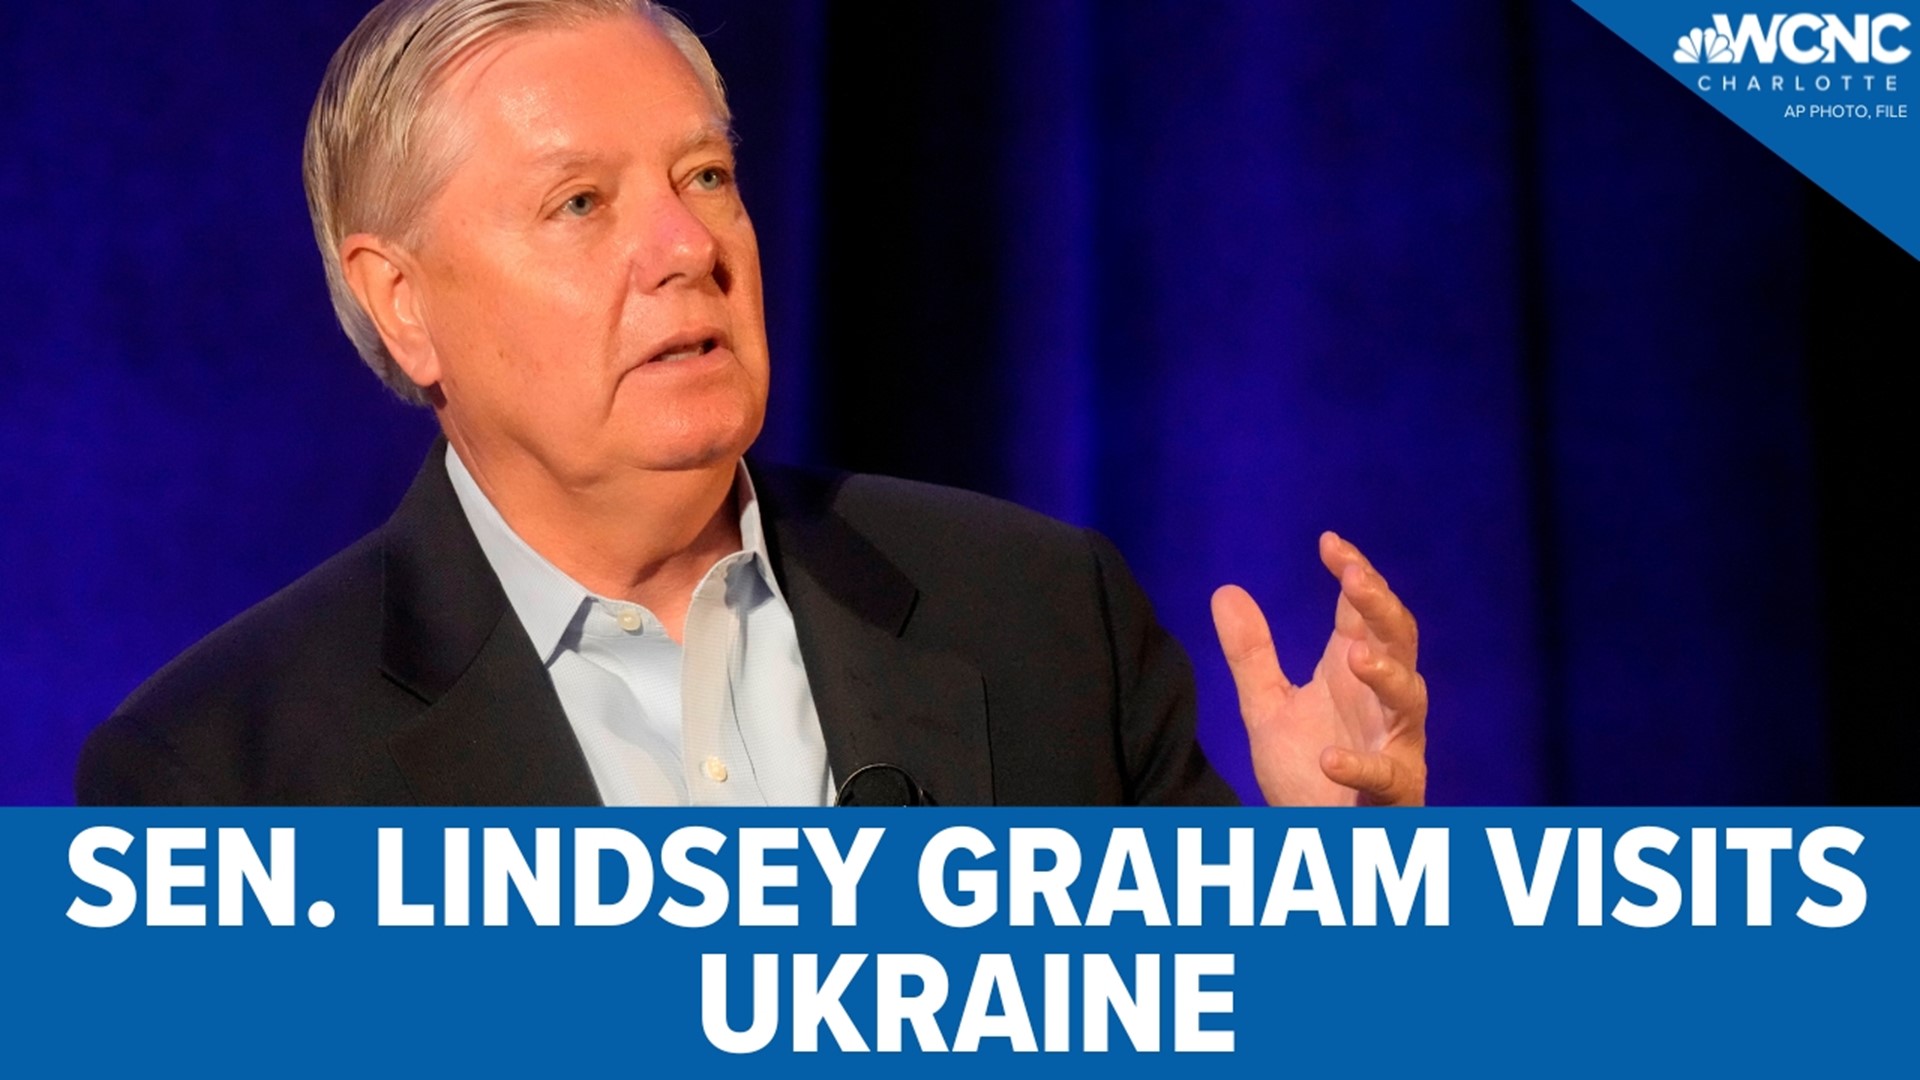 A bi-partisan group of Senators, including South Carolina's Lindsey Graham, are in Ukraine to meet with the country's President and other officials.